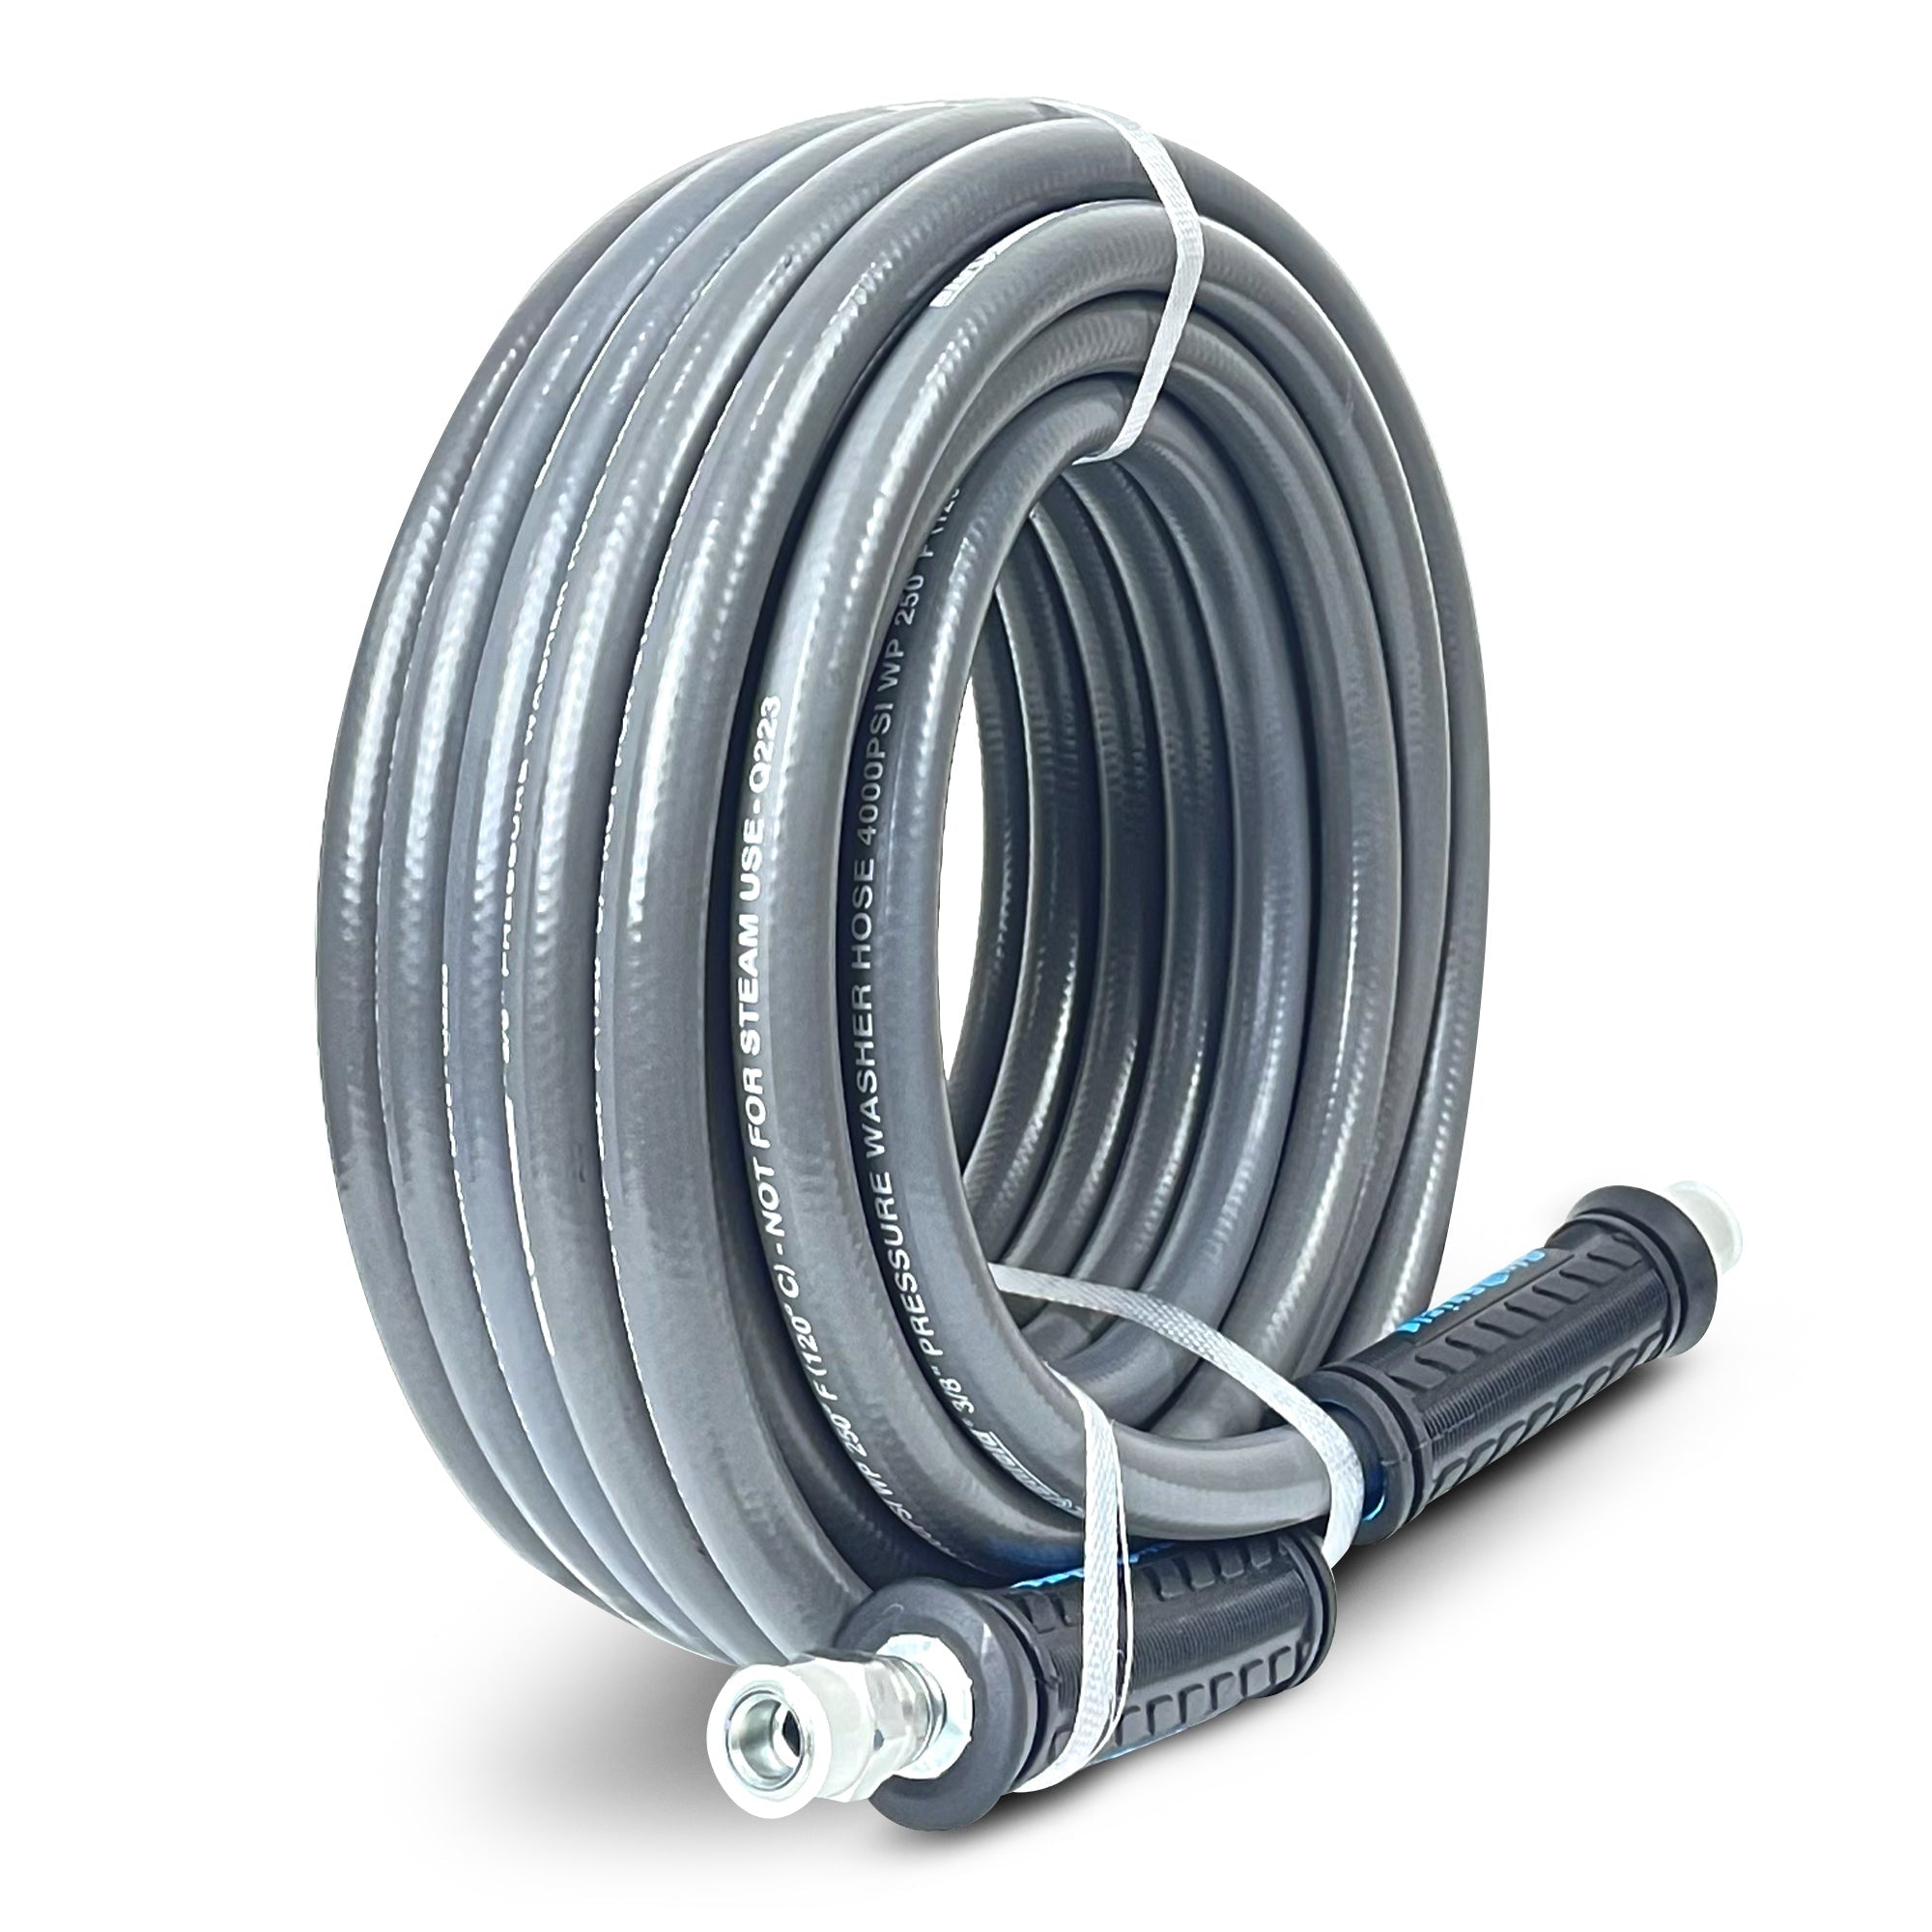 BluShield 3/8" Single Wire Pressure Washer Replacement Hose with NPT Fittings, 4000PSI